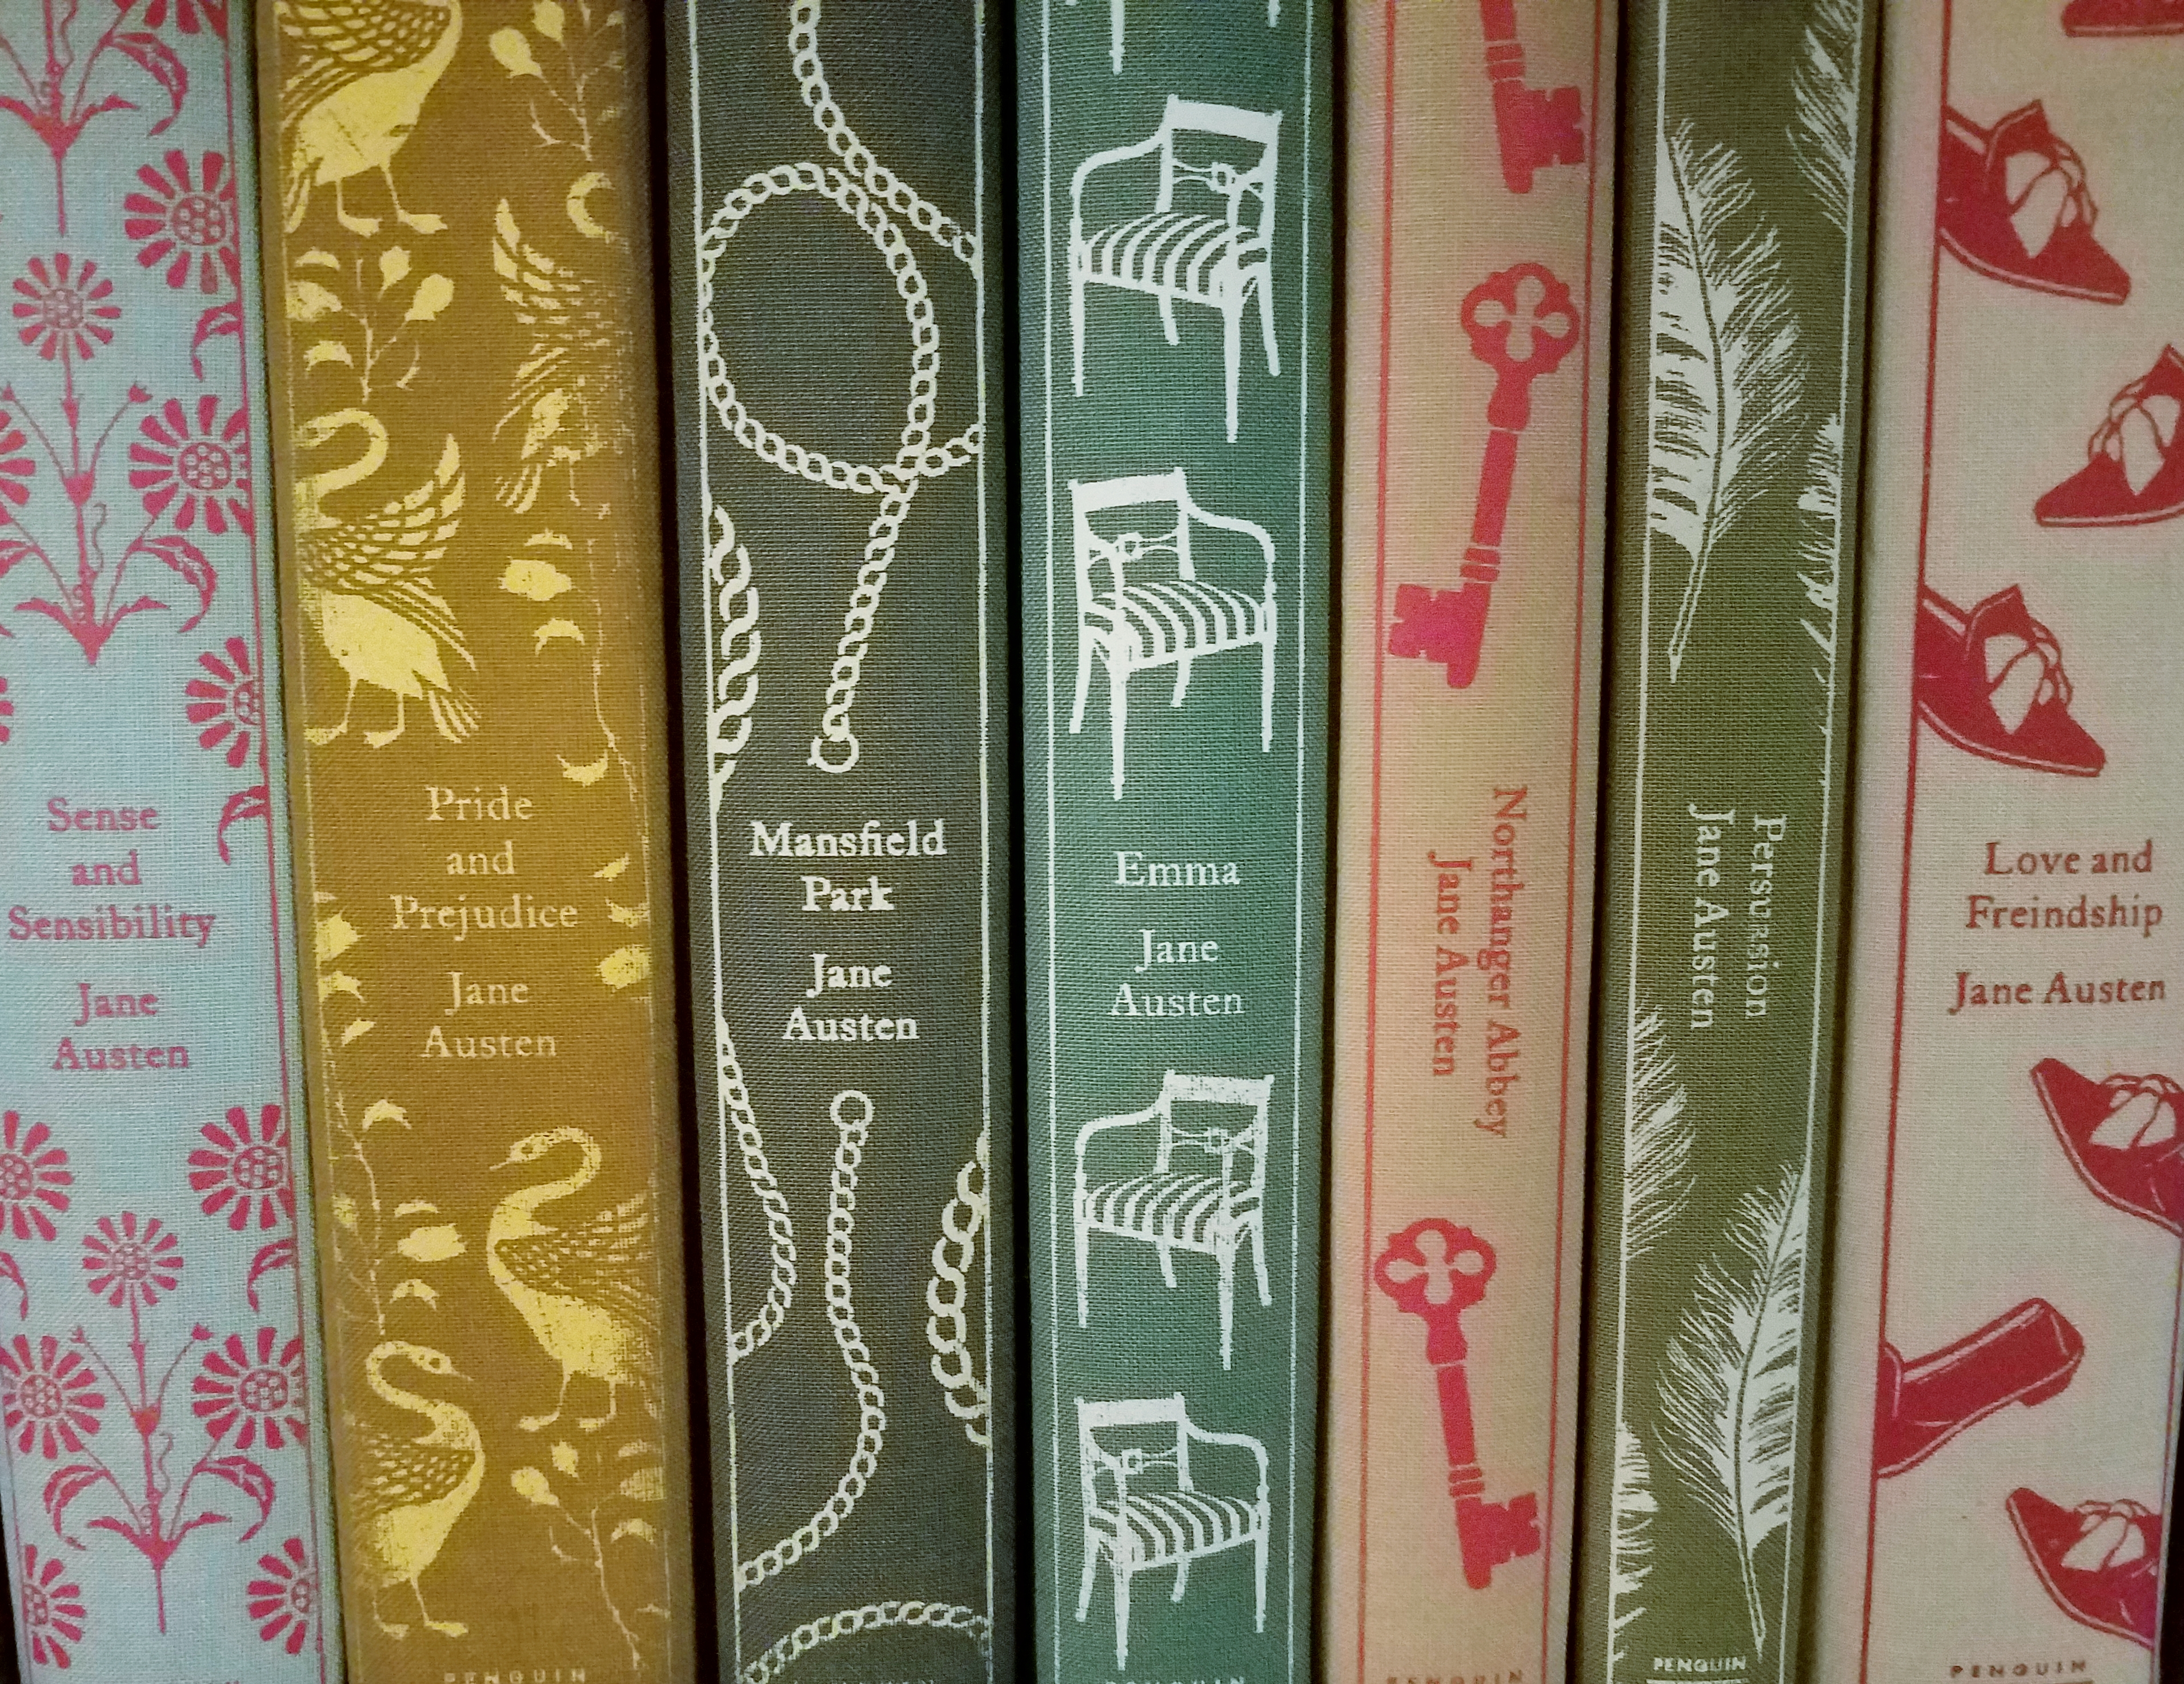 A collection of Jane Austen's novels